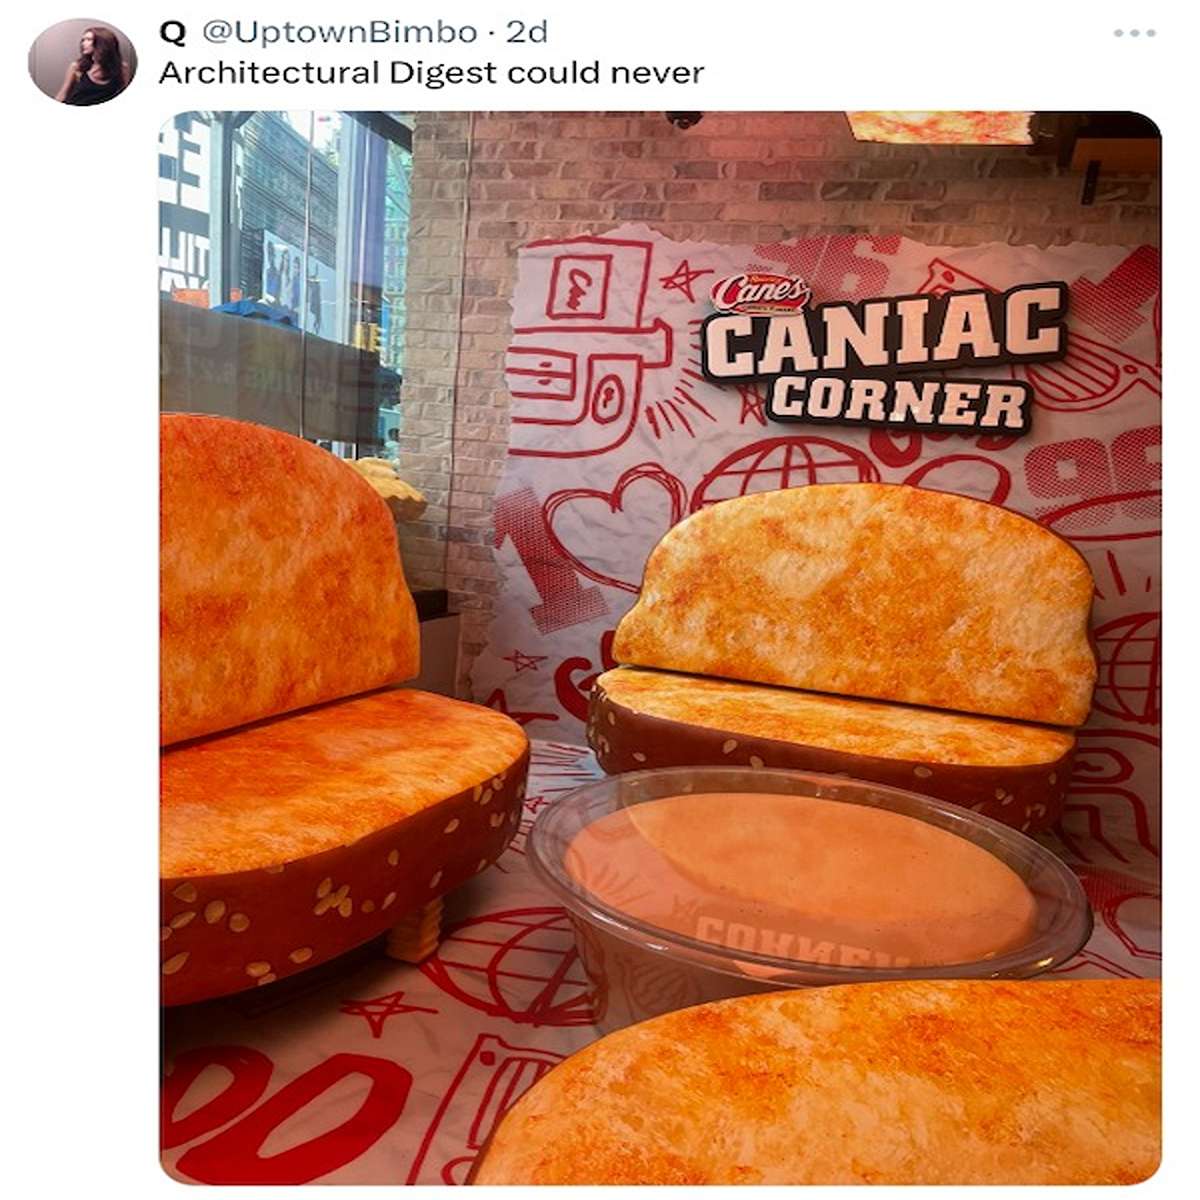 funny tweets and memes - junk food - Q 2d Architectural Digest could never Te 20 30 Cane's Caniac Corner